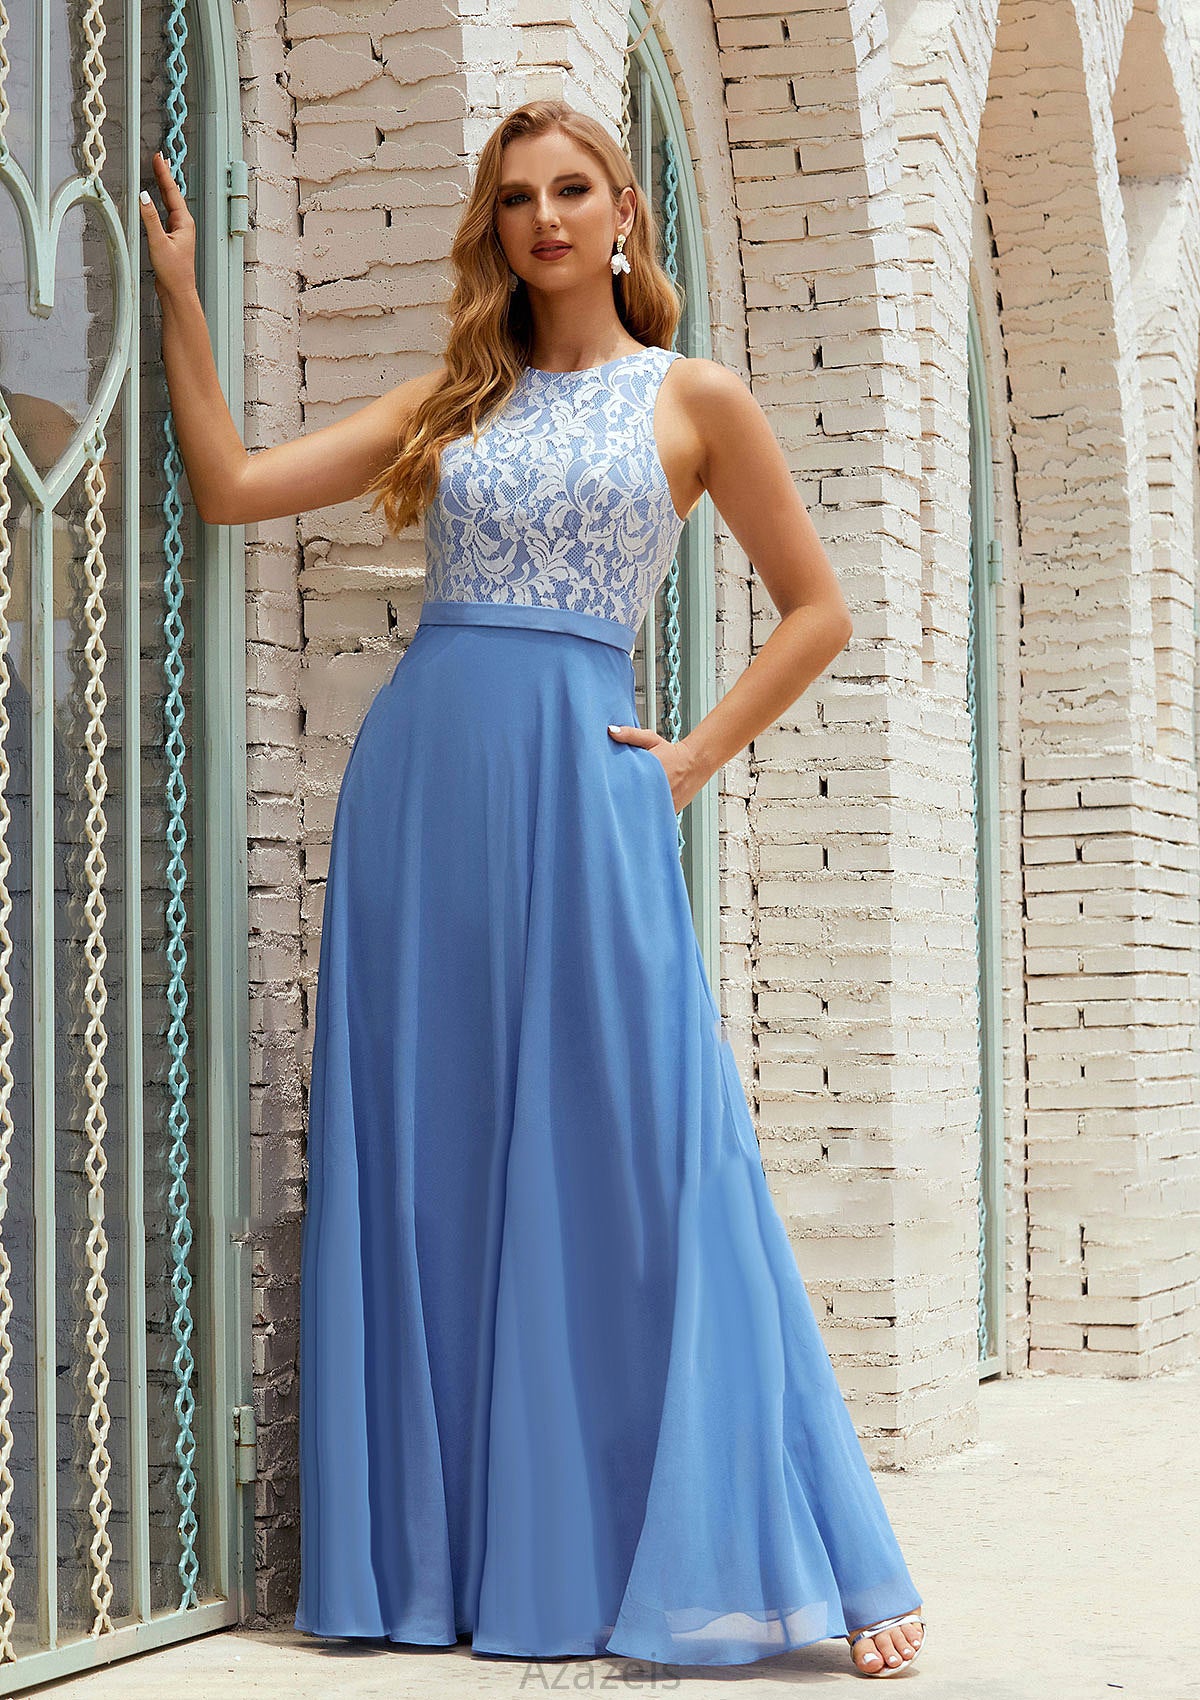 A-line Scoop Neck Sleeveless Chiffon Long/Floor-Length Bridesmaid Dresses With Pockets Lace Lori DFP0025616